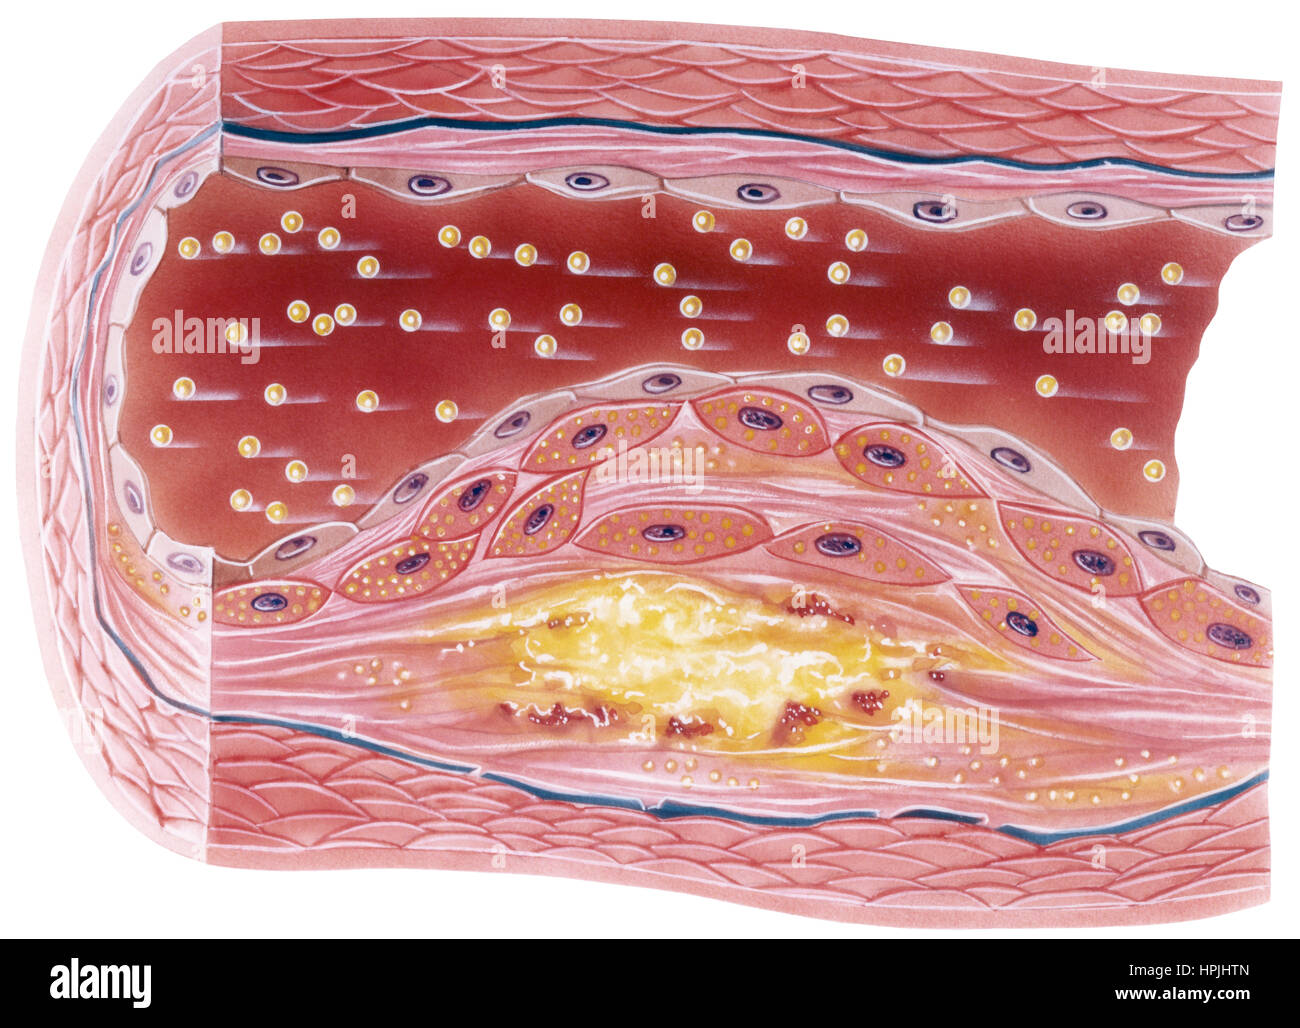 Vascular atherosclerosis showing a cutaway view of accumulated plaque in an afflicted blood vessel. This condition is entirely avoidable and reversabl Stock Photo